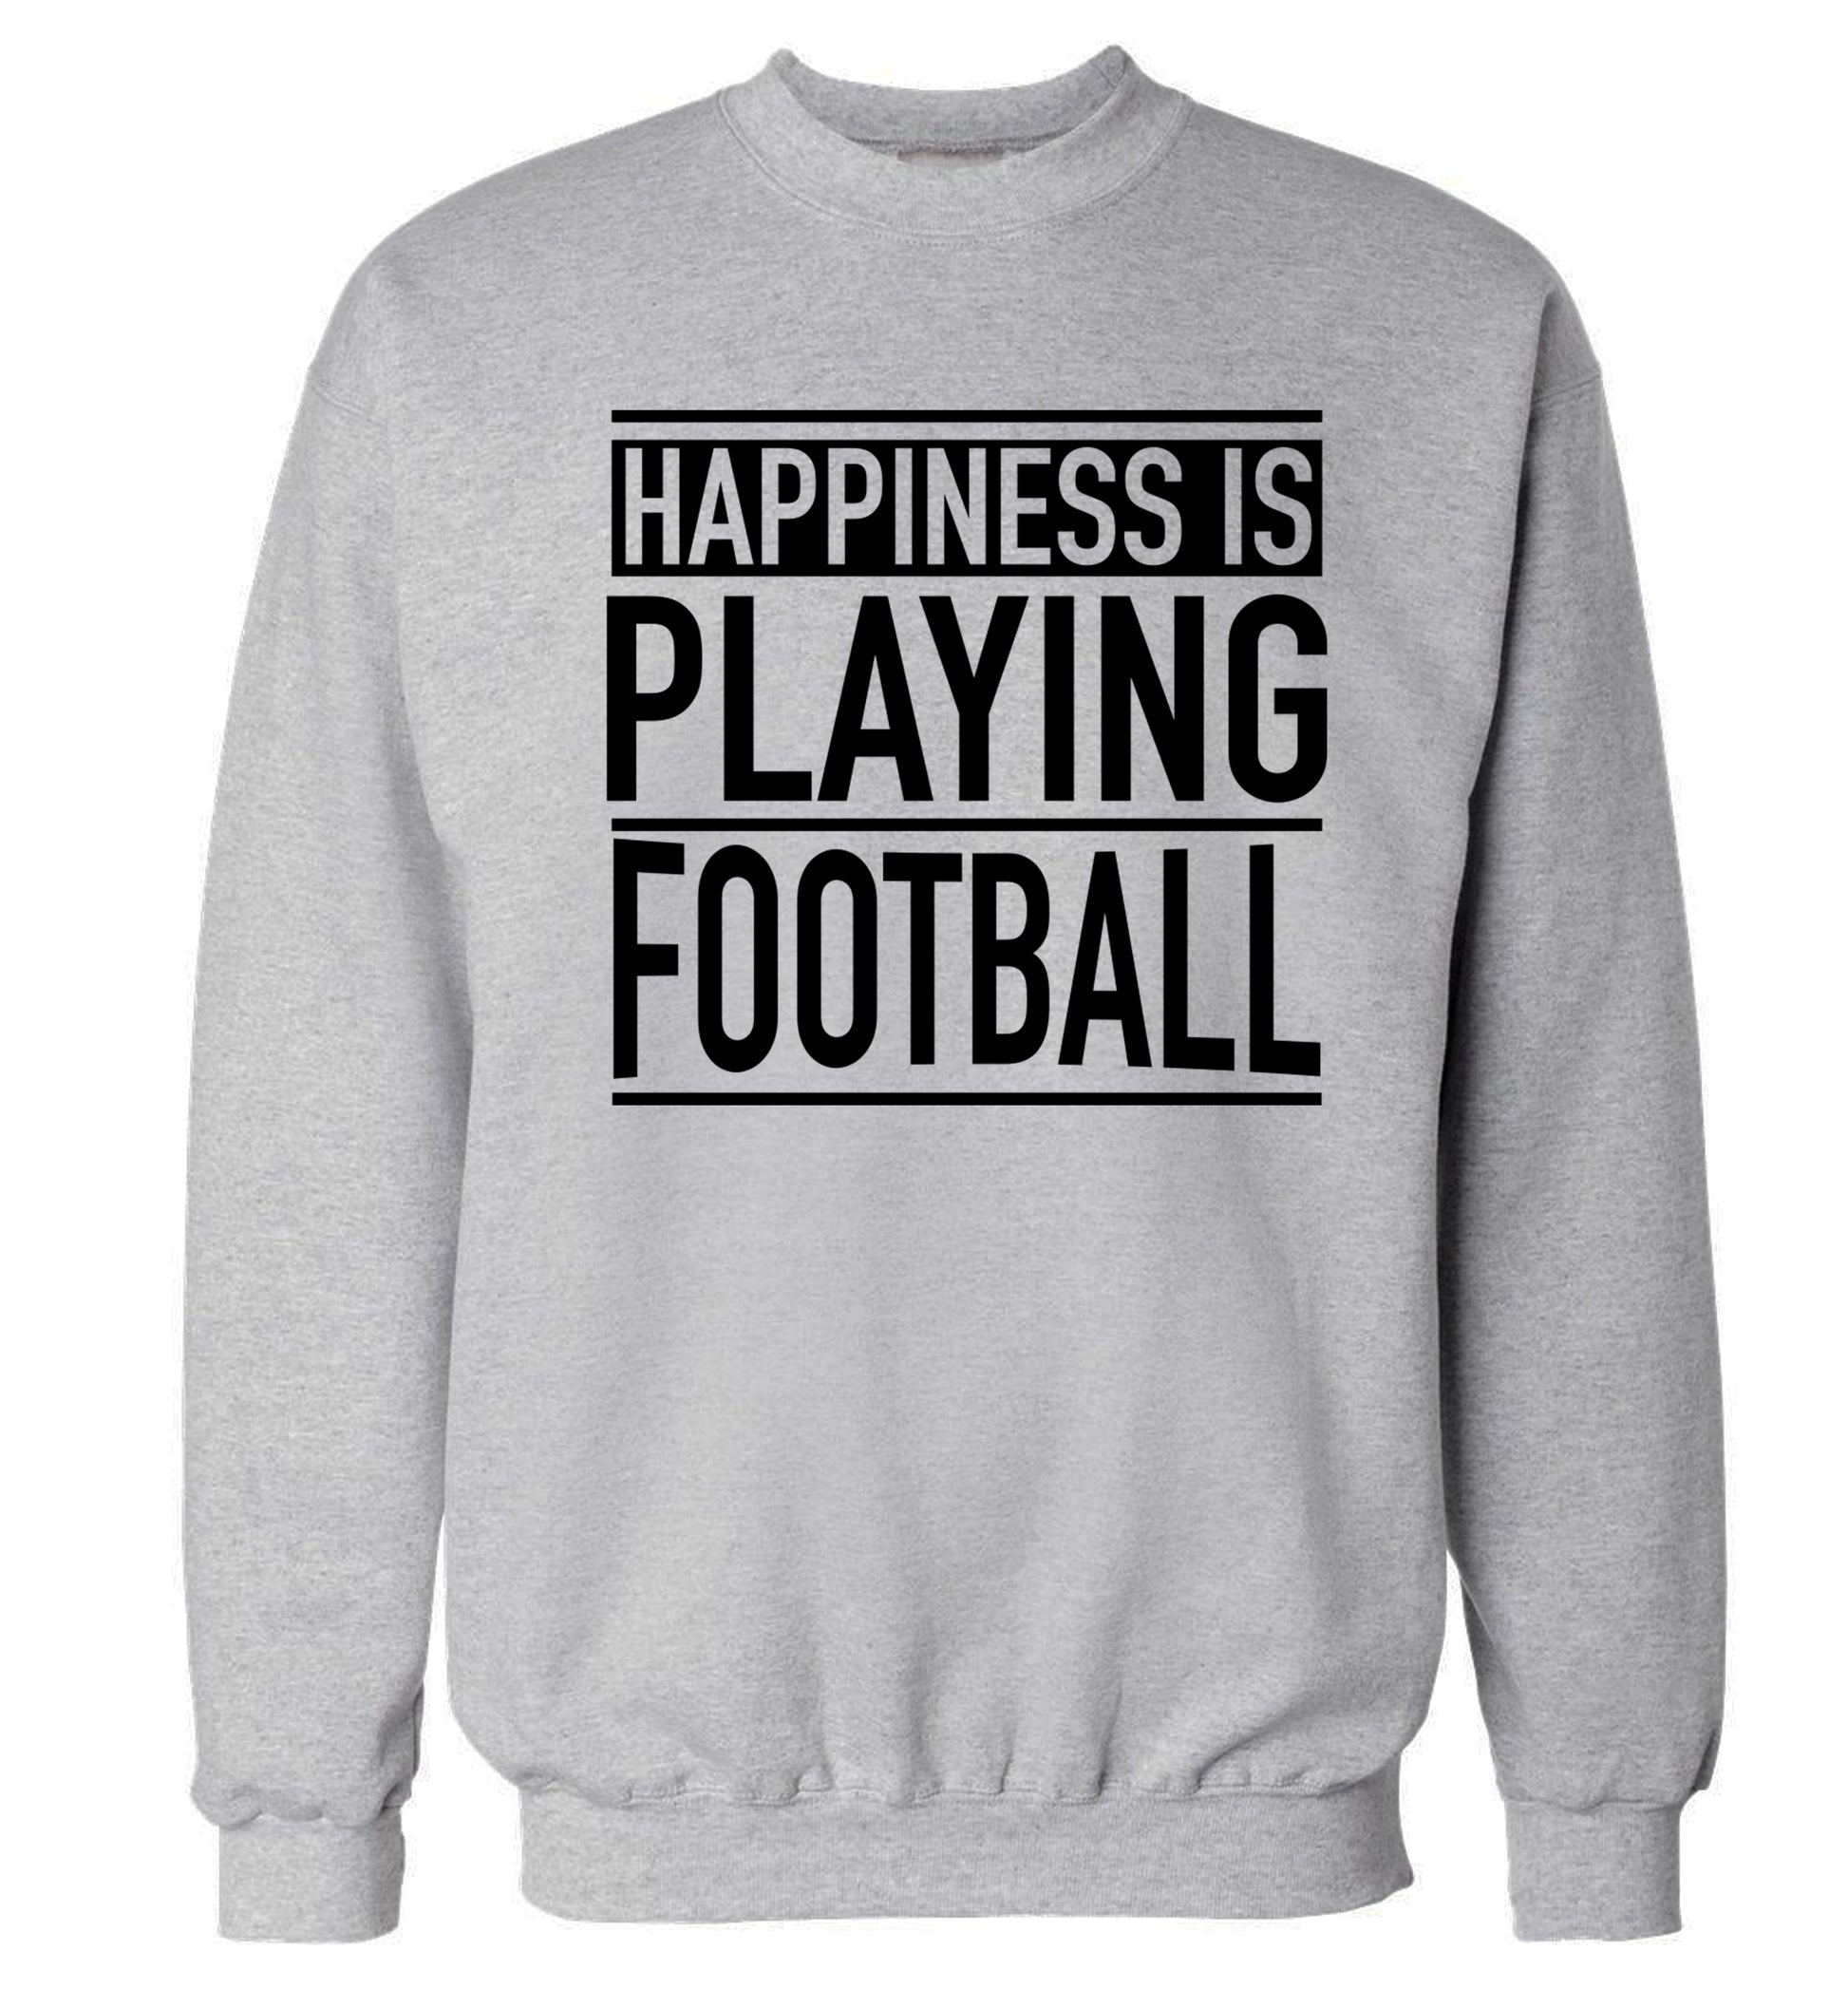 Happiness is playing football Adult's unisexgrey Sweater 2XL